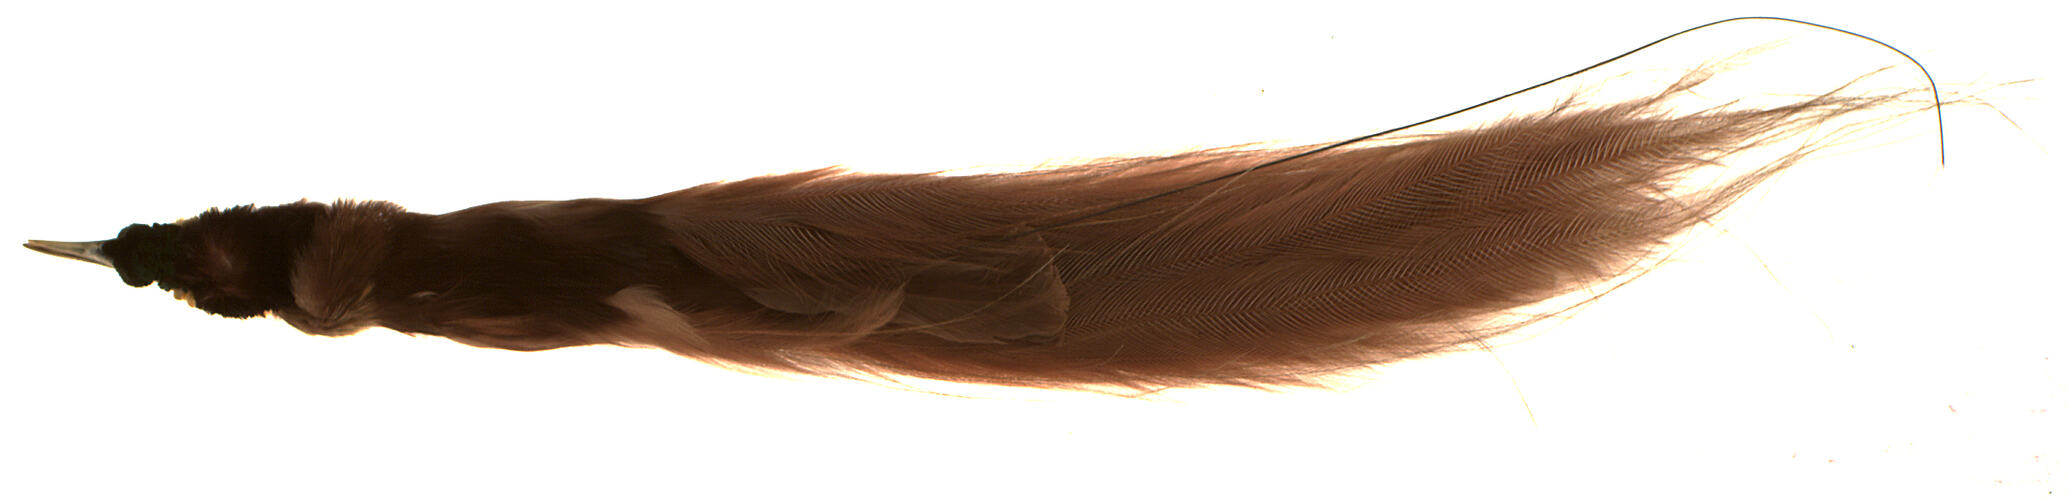 Prepared bird skin with long brown tail.